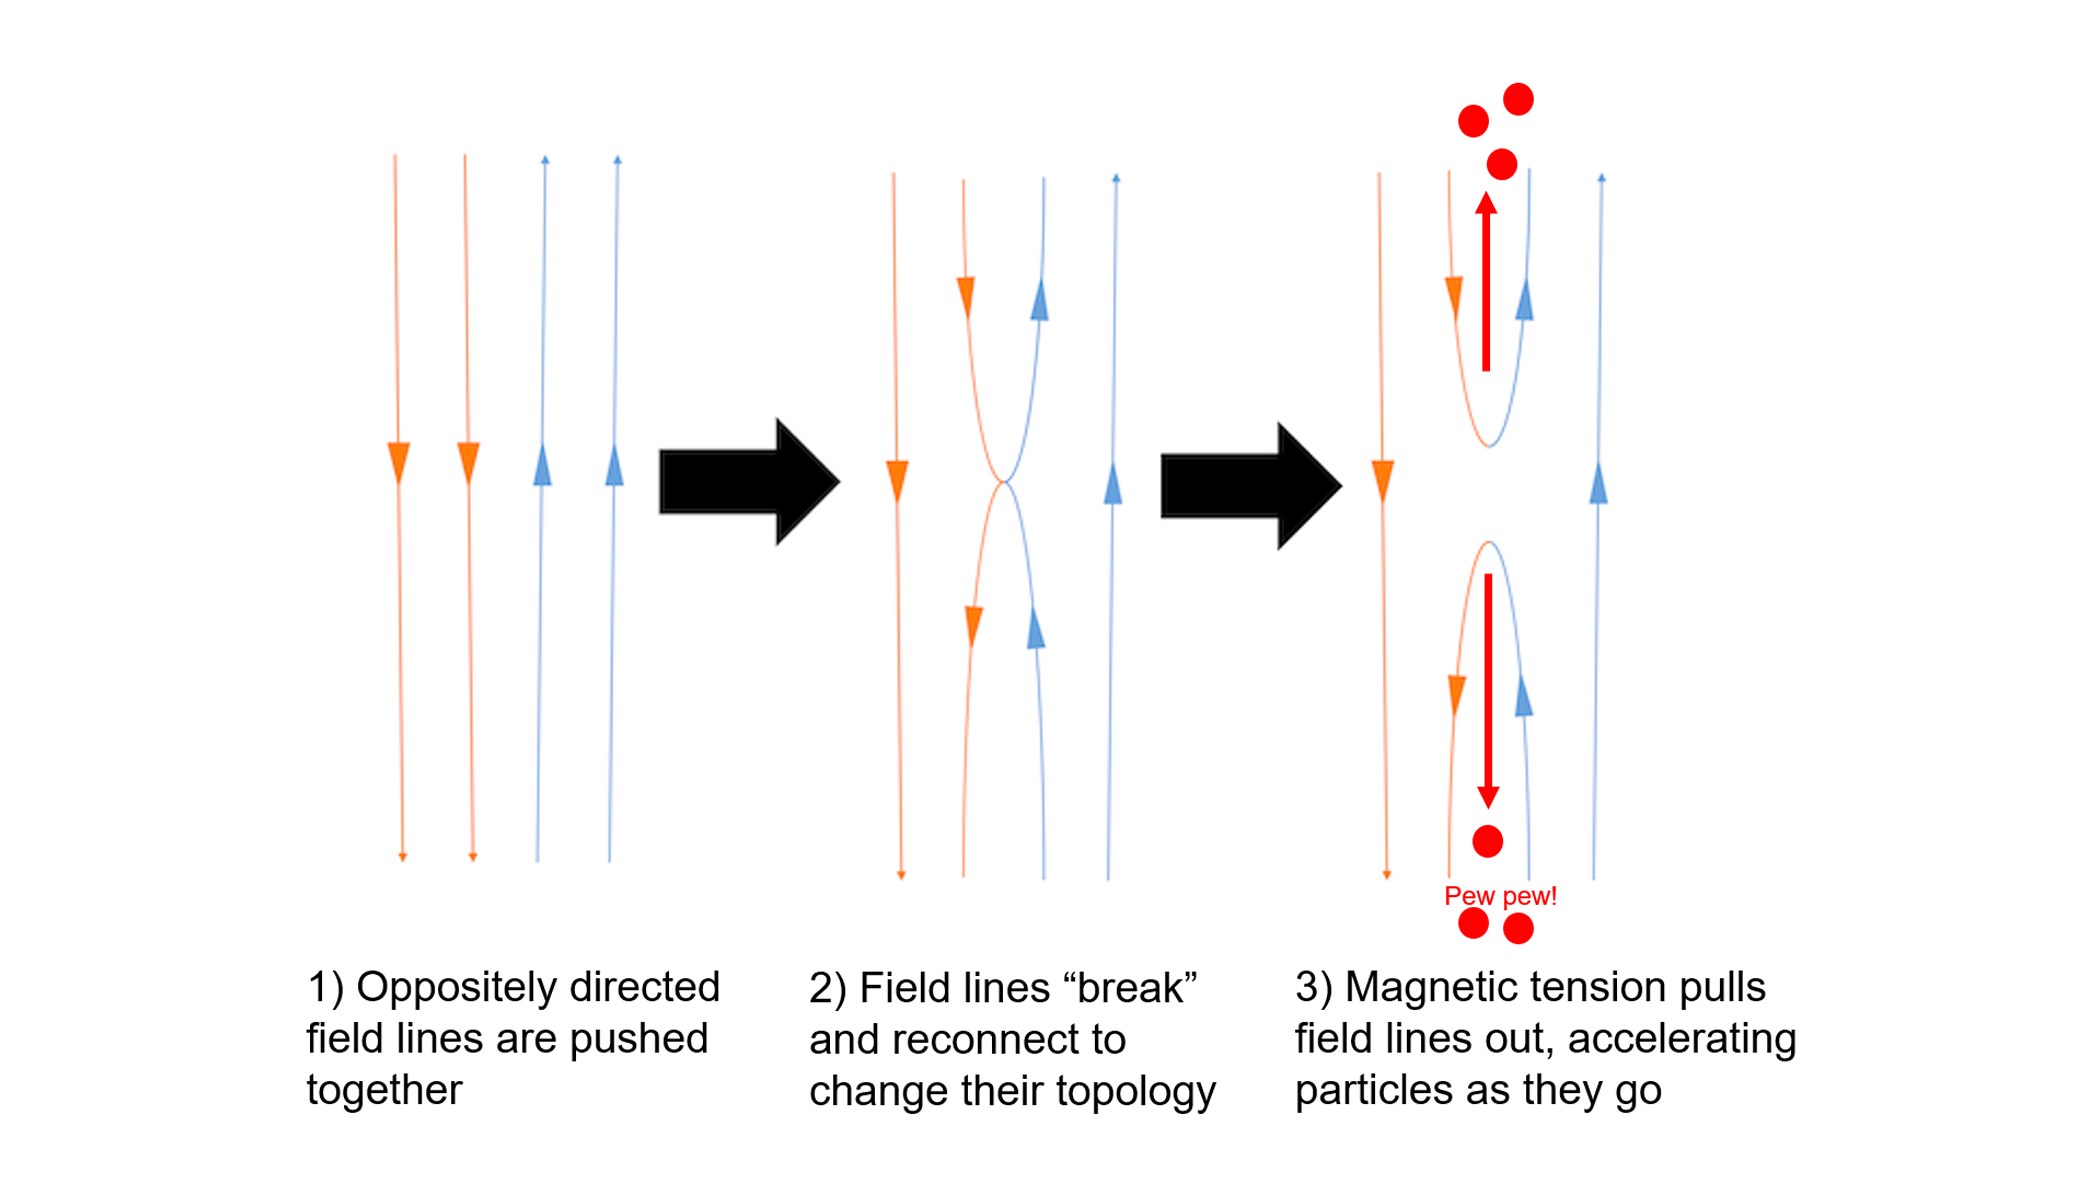 An image that simplifies the magnetic reconnection process at the Earth's magnetosphere. 1. Oppositely directed field lines are pushed together. 2. Field lines break and reconnect to change their topology. 3. Magnetic tension pulls field lines out, accelerating particles as they go.